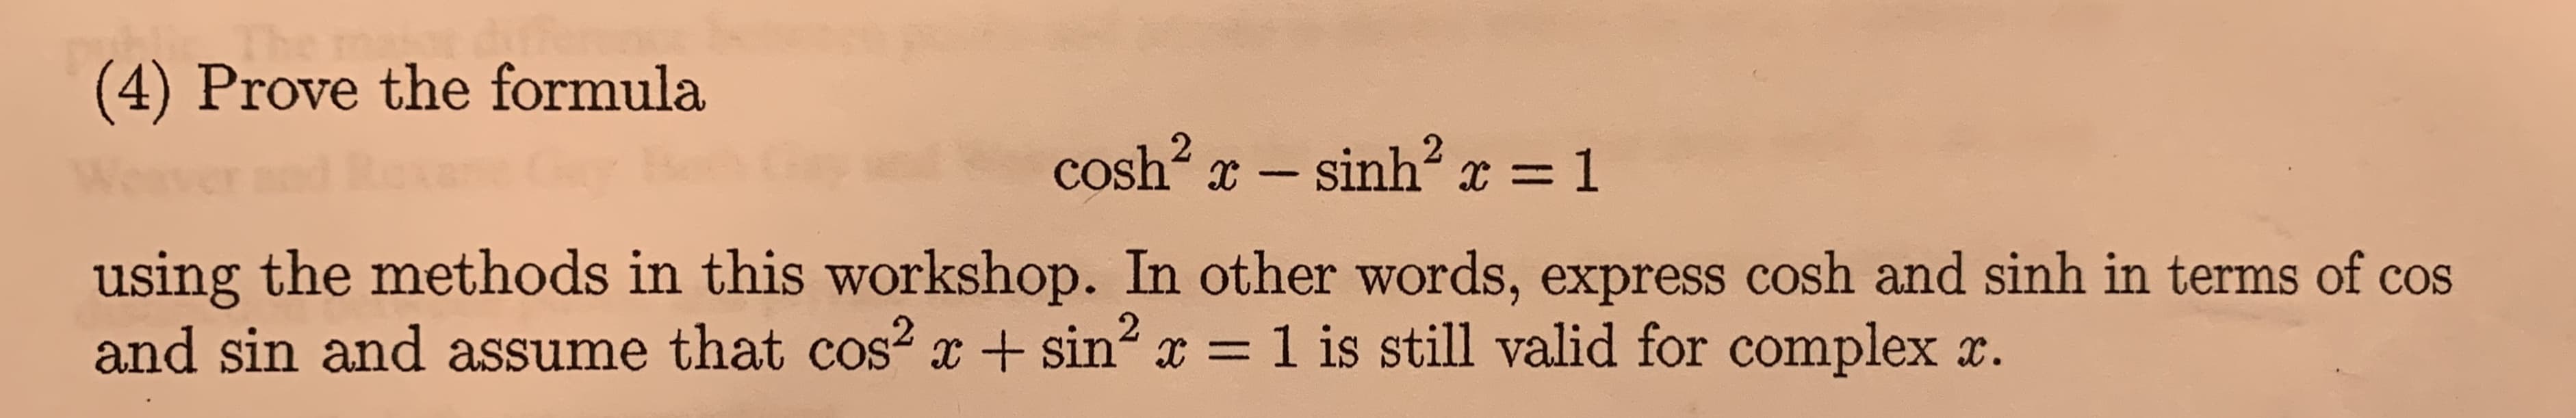 (4) Prove the formula
cosh x
- sinh2 x 1
using the methods in this workshop. In other words, express cosh and sinh in terms of cos
and sin and assume that cos2 xsin2 1 is still valid for complex x.
